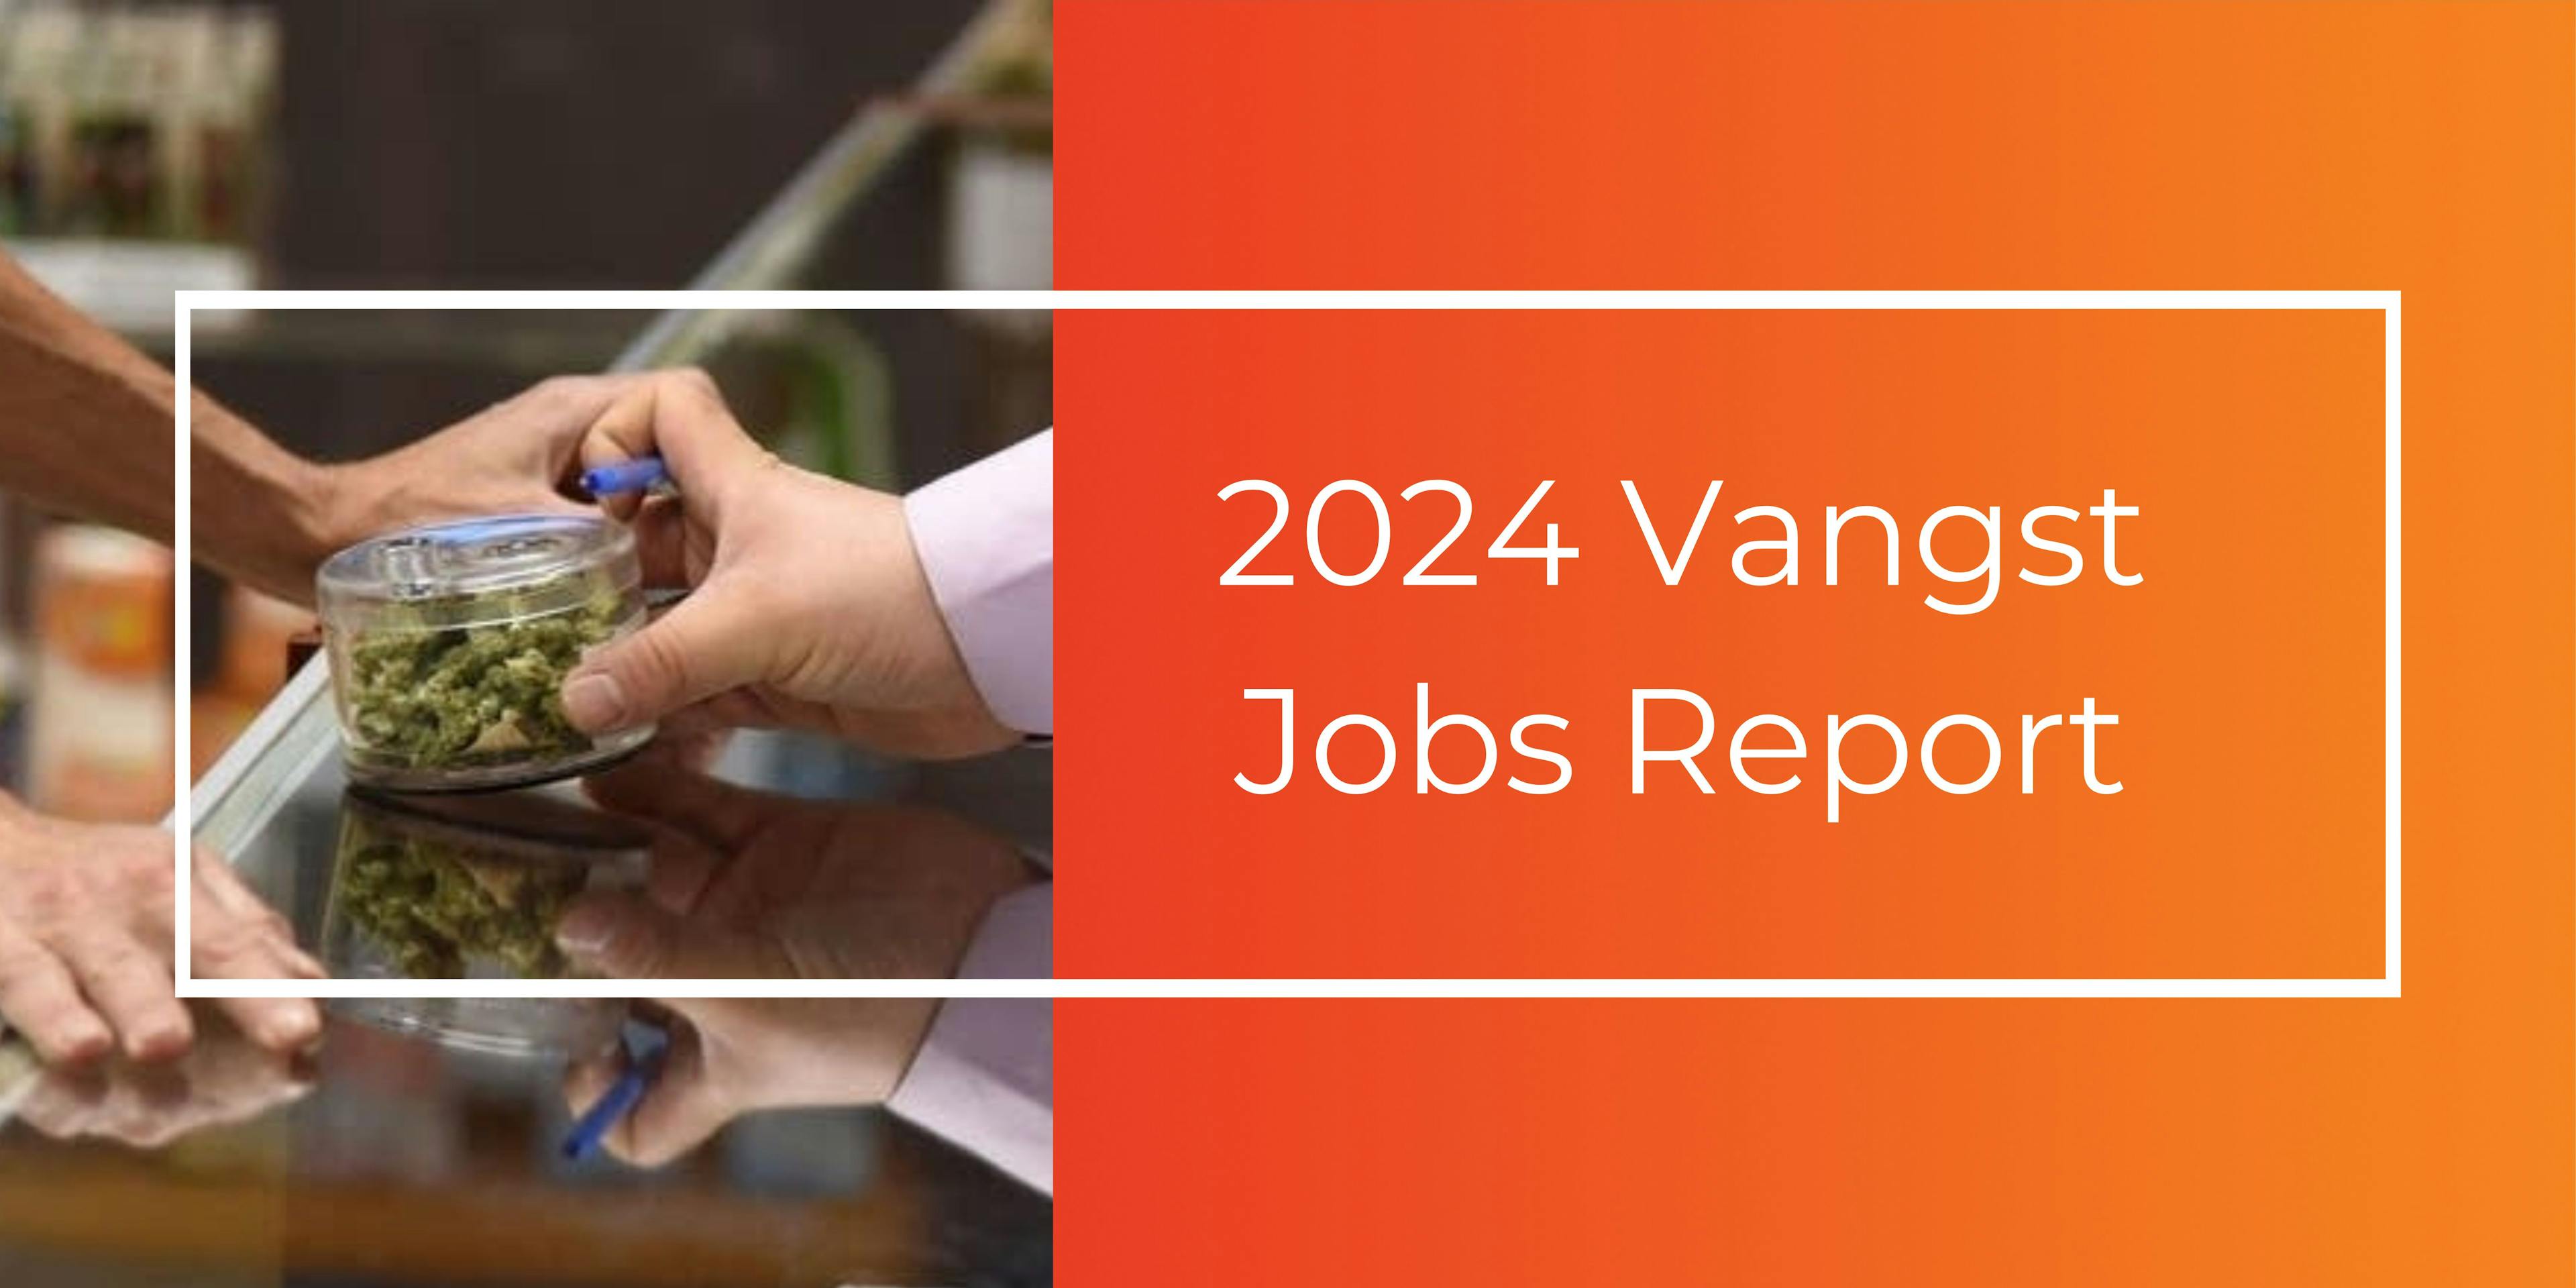 Live Now: The Vangst 2024 Cannabis Jobs Report 